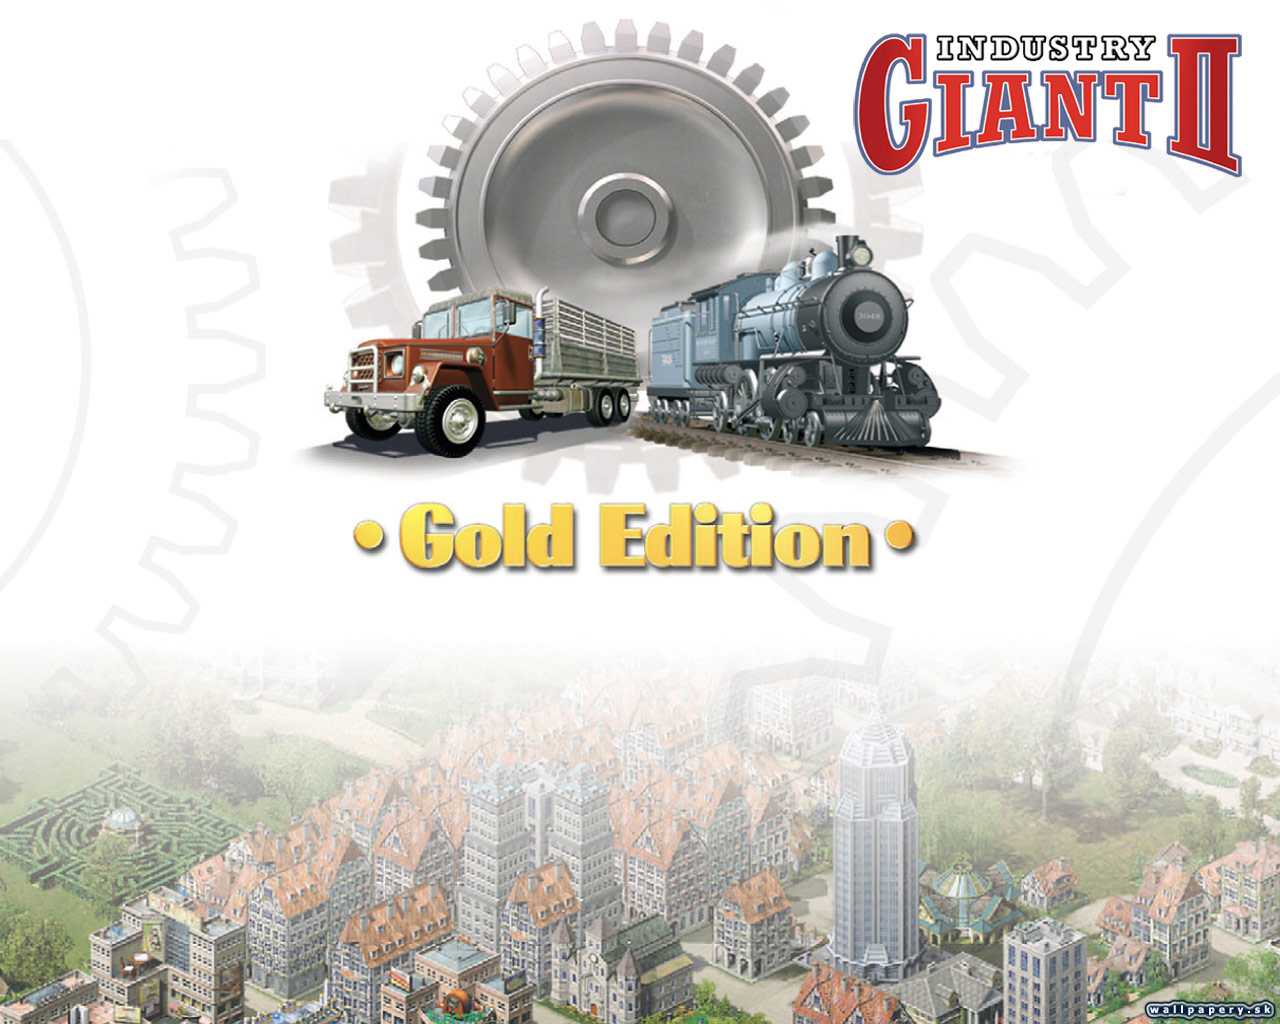 Industry Giant II: Gold Edition - wallpaper 2